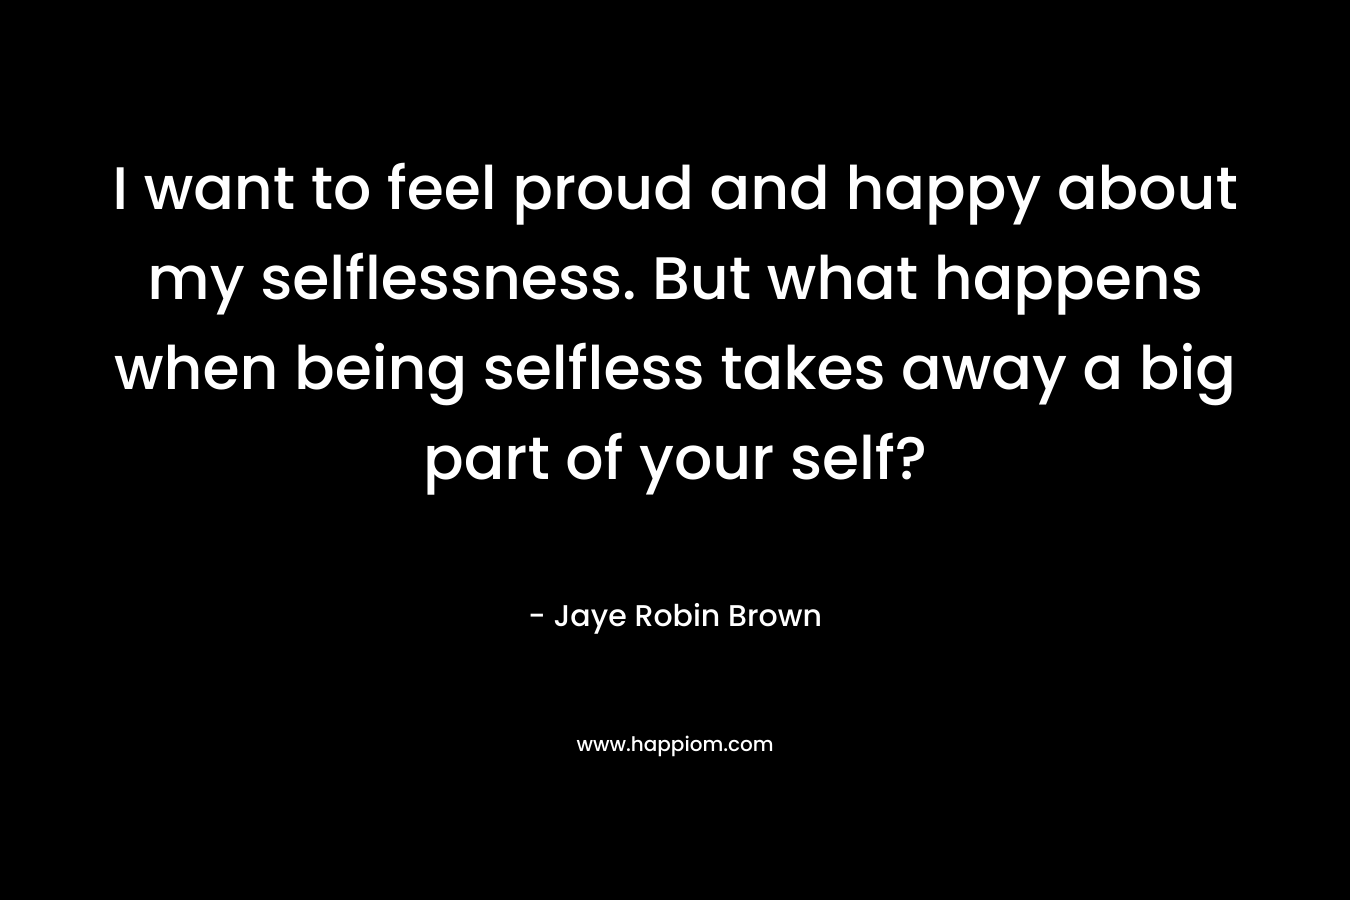 I want to feel proud and happy about my selflessness. But what happens when being selfless takes away a big part of your self? – Jaye Robin Brown